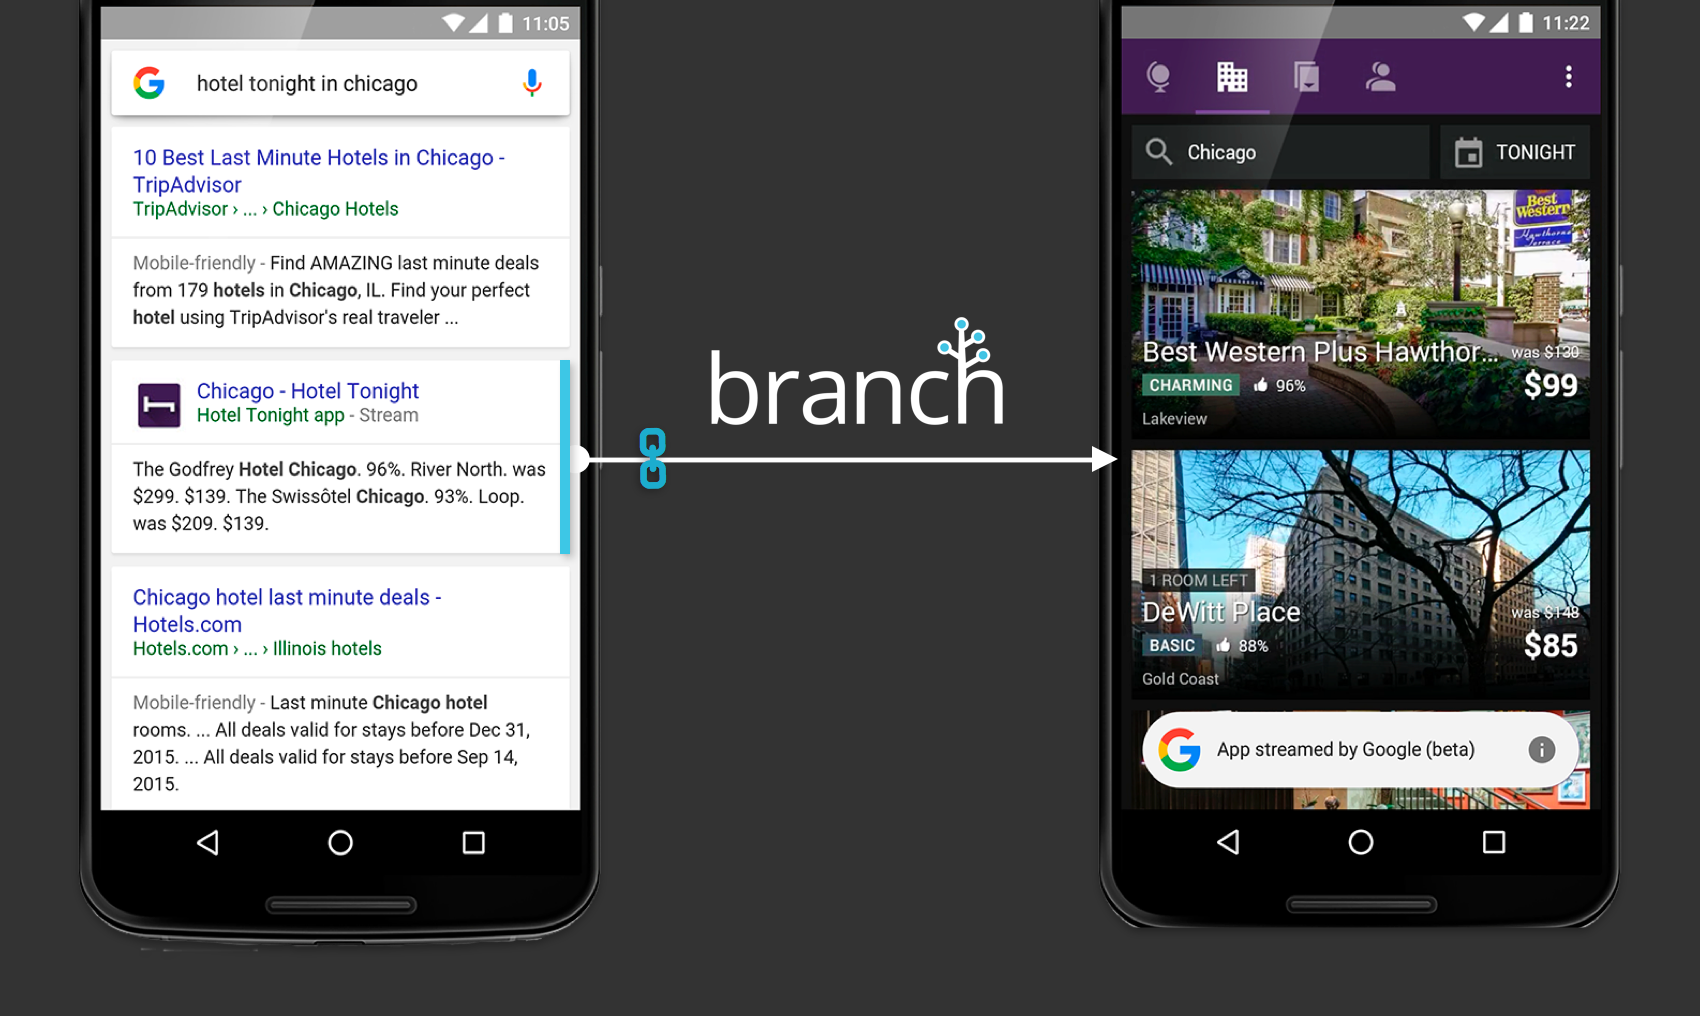 Google app streaming with Branch